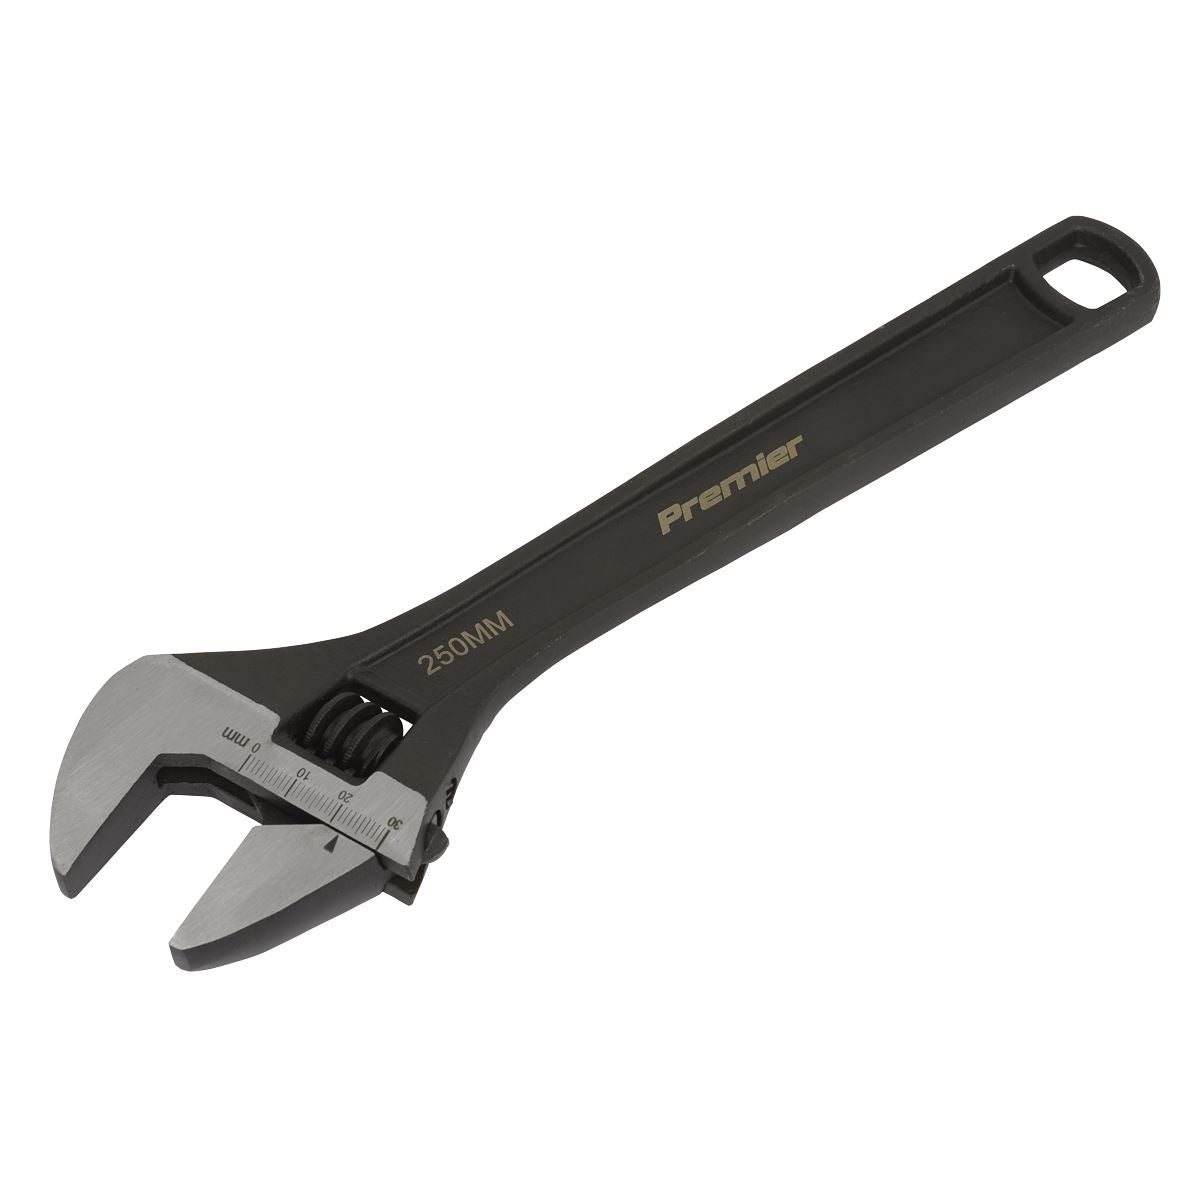 Sealey Premier Adjustable Wrench 250mm Jaw Capacity 27mm